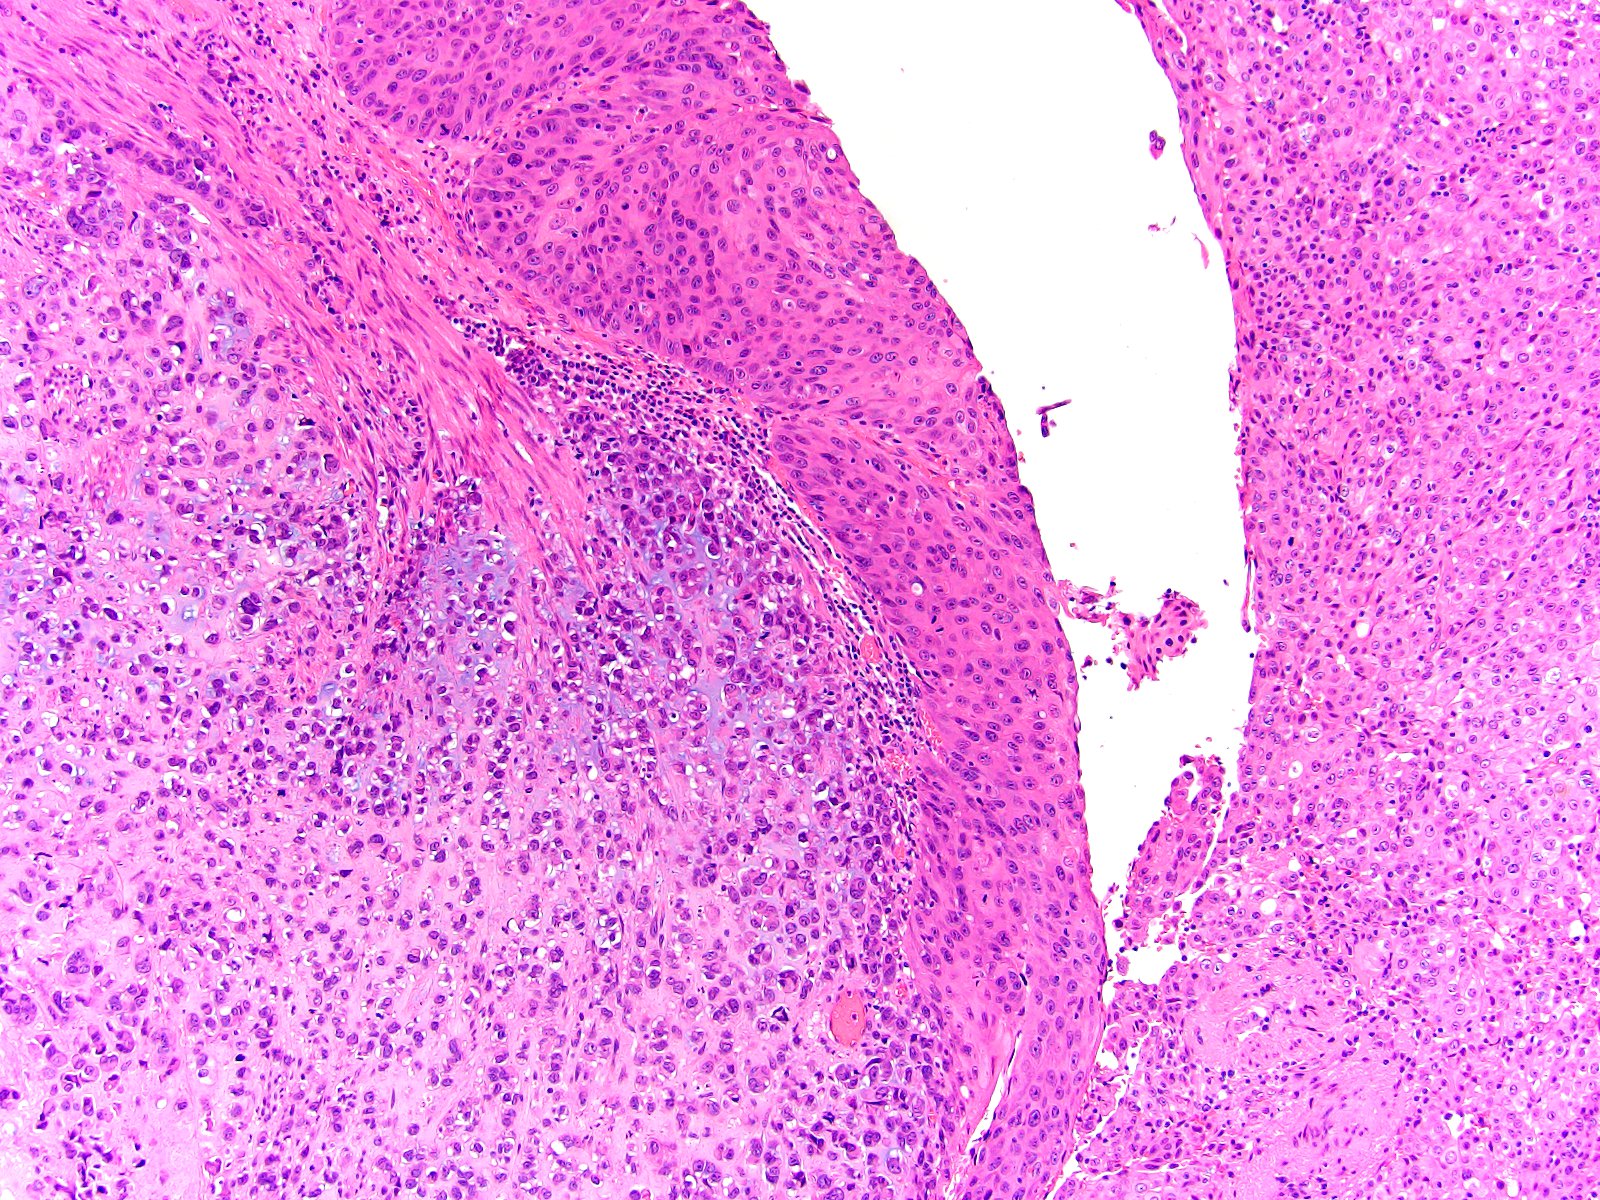 Classic urothelial carcinoma